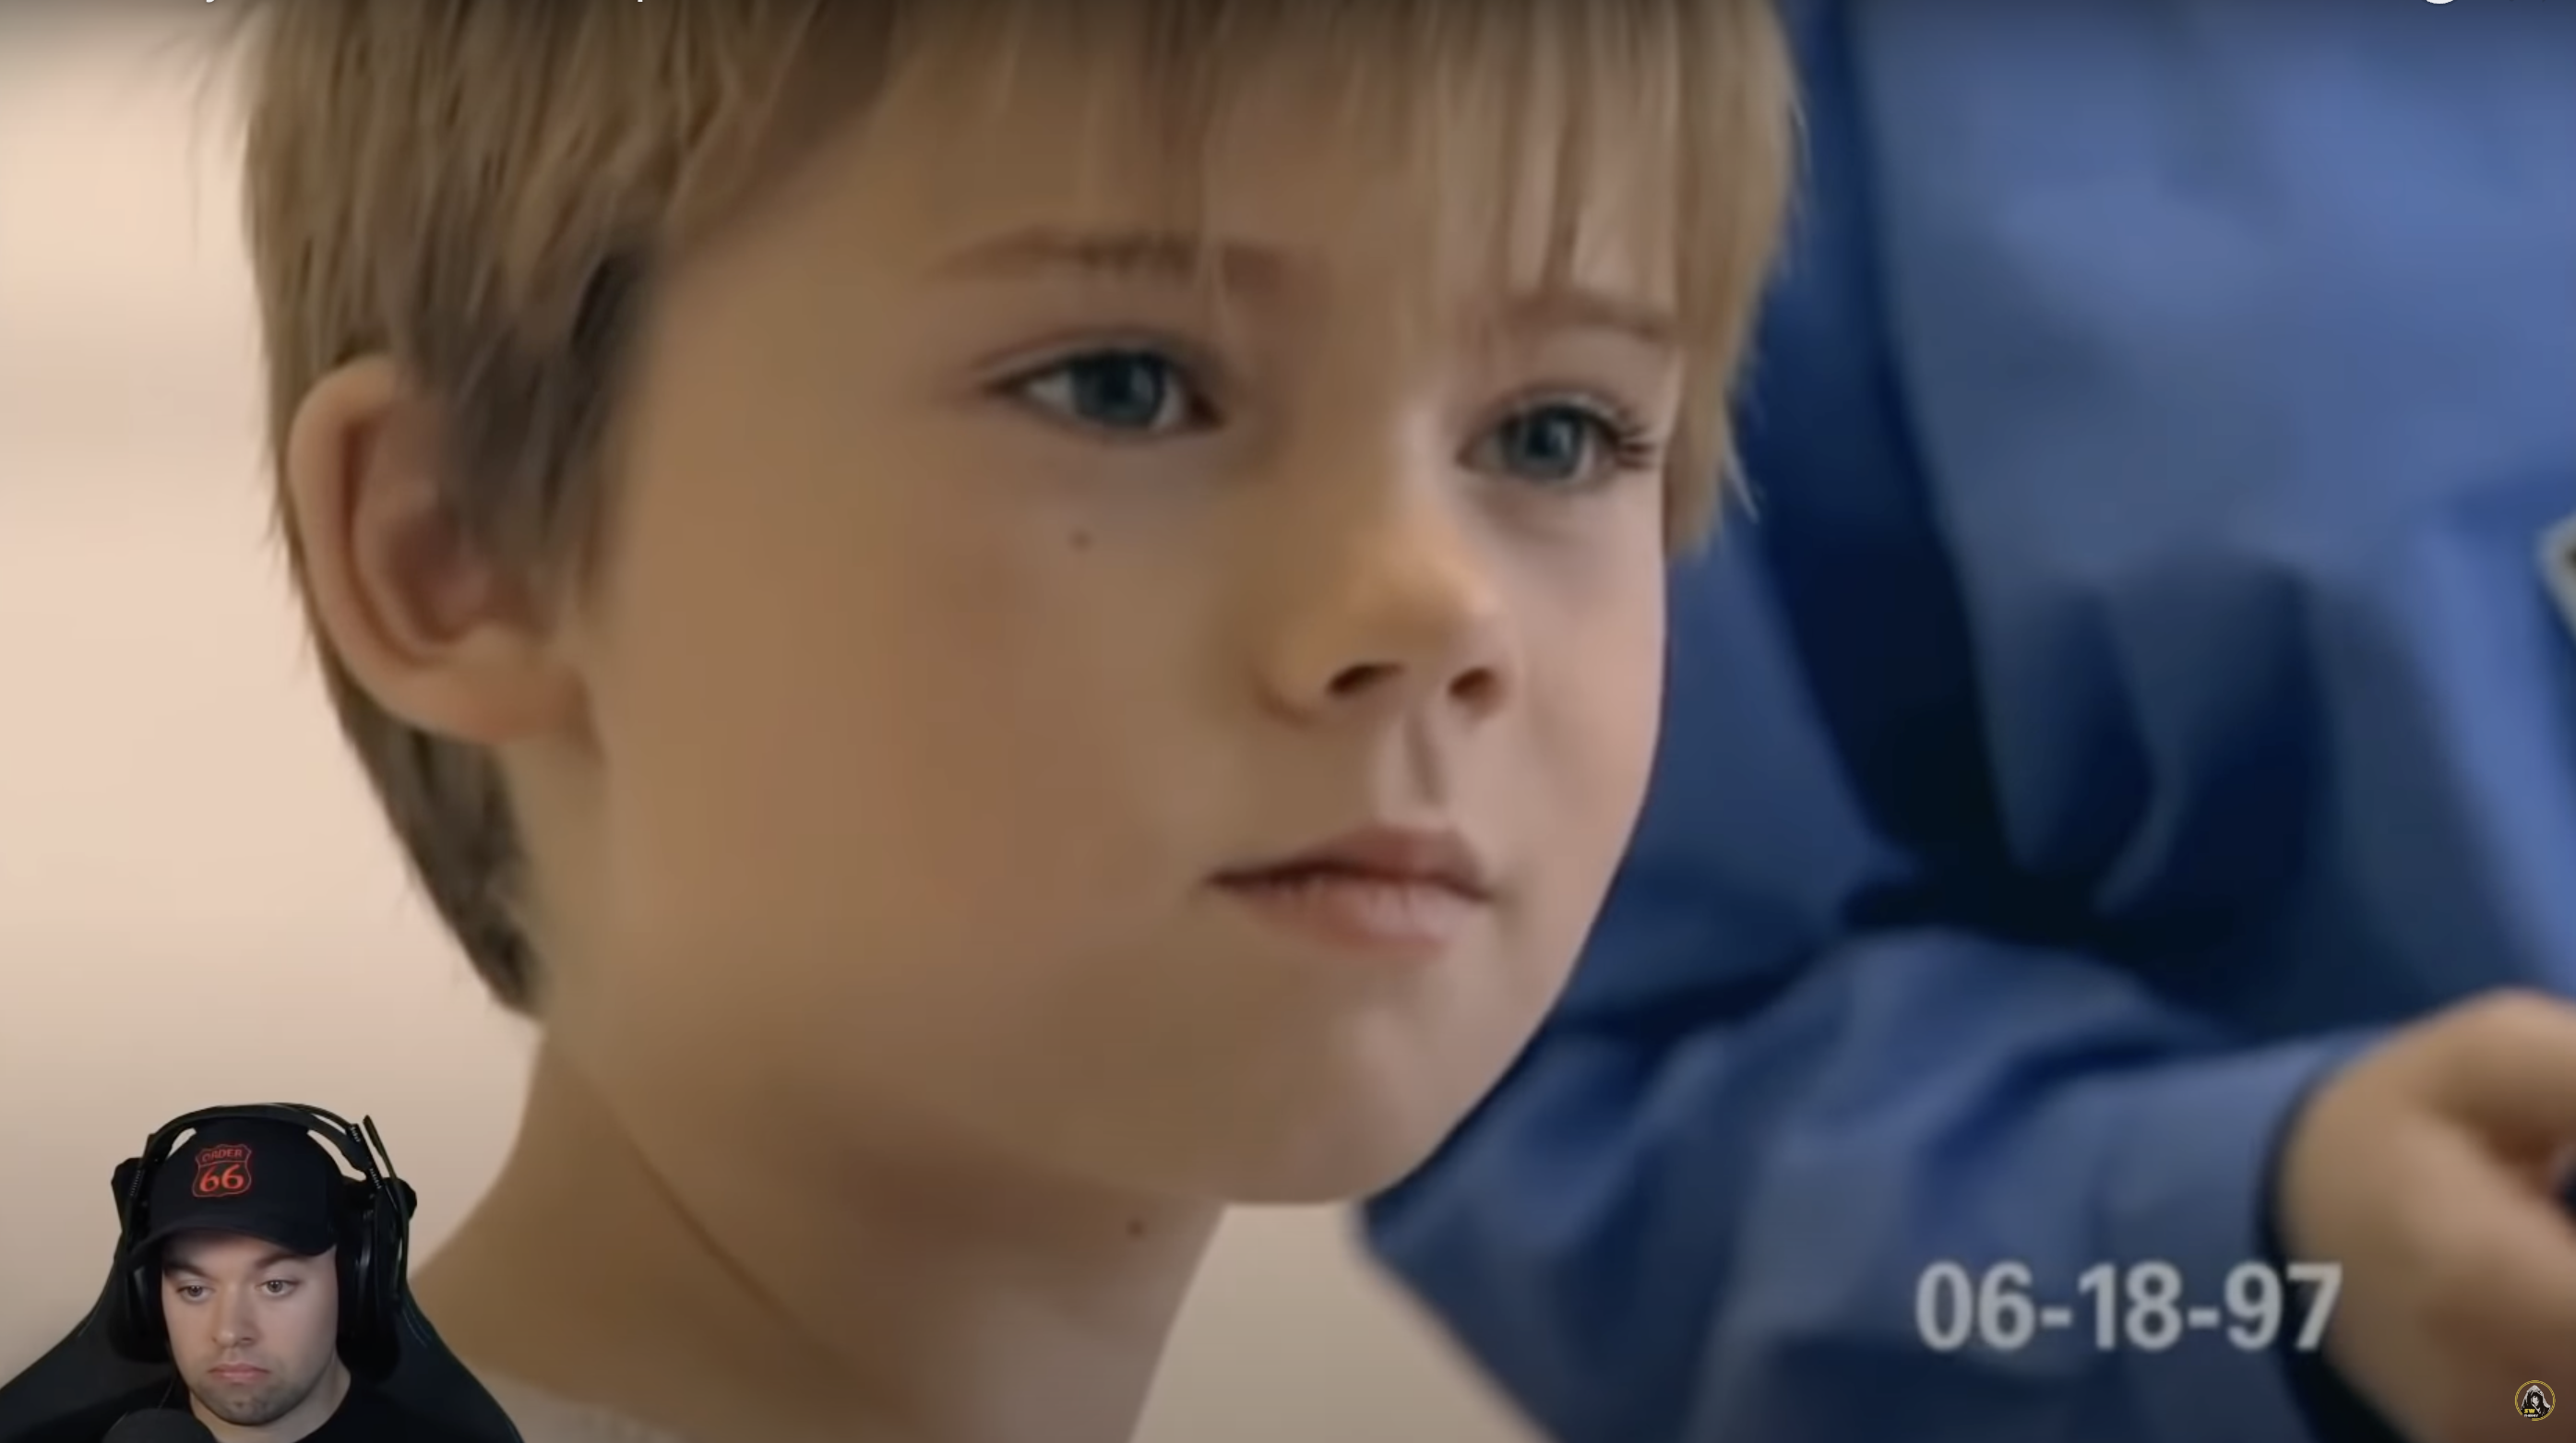 A photo of Jake Lloyd from the Anakin Skywalker Audition Tapes, as seen in a video dated August 6, 2020 | Source: YouTube/StarWarsTheory